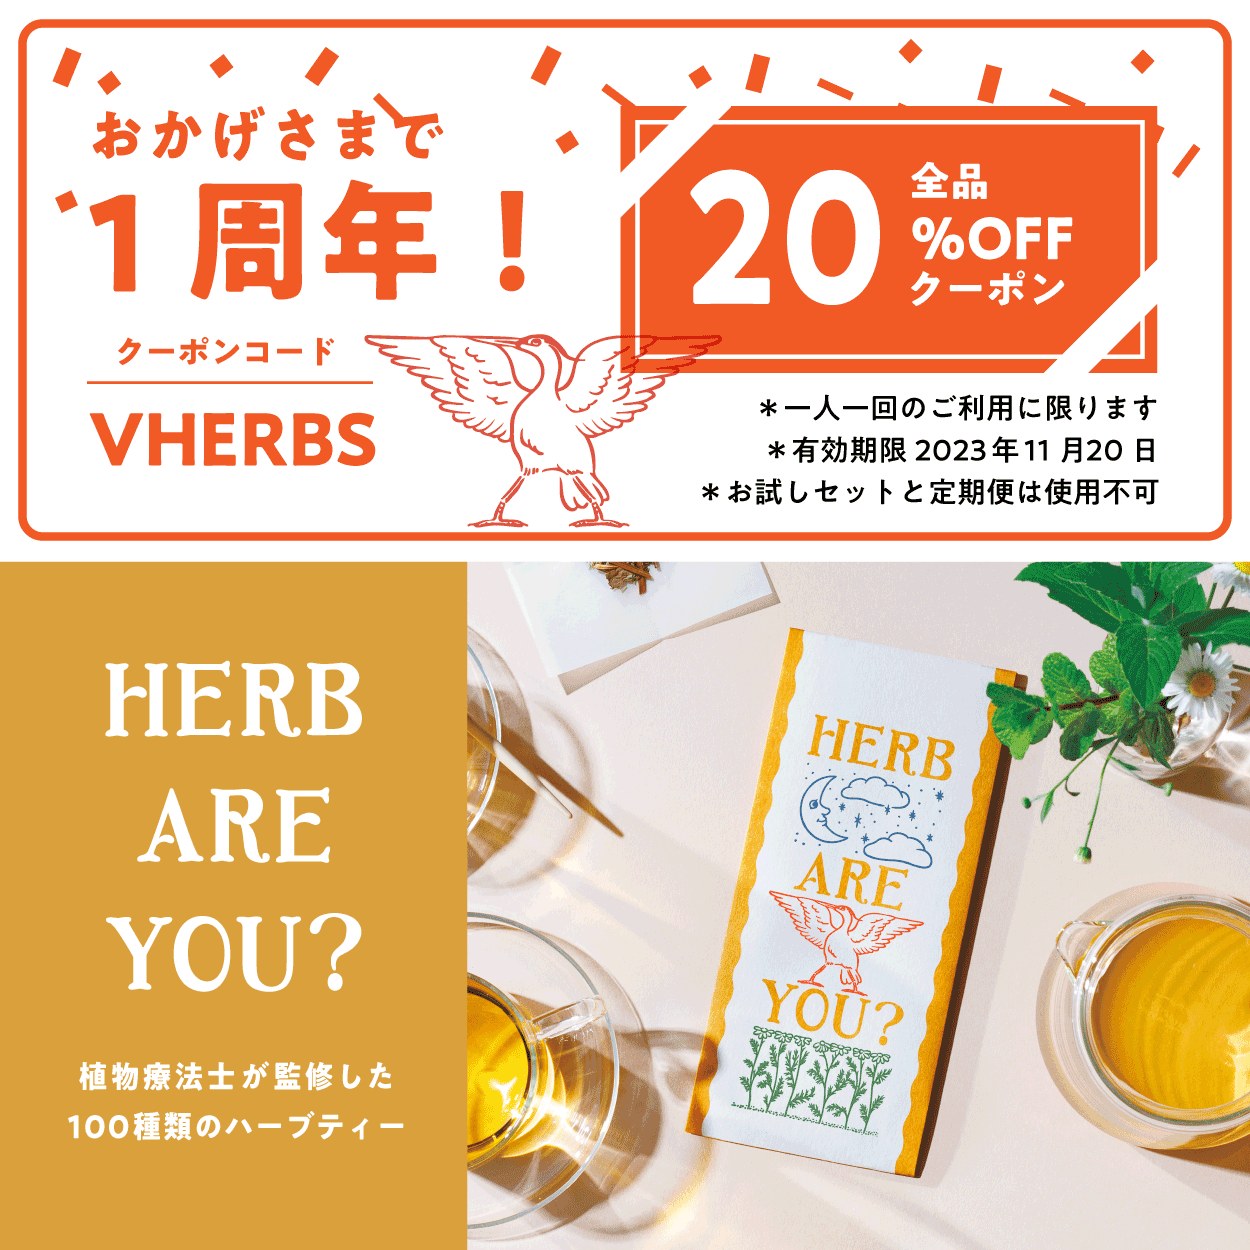 HERB ARE YOU？１周年クーポン